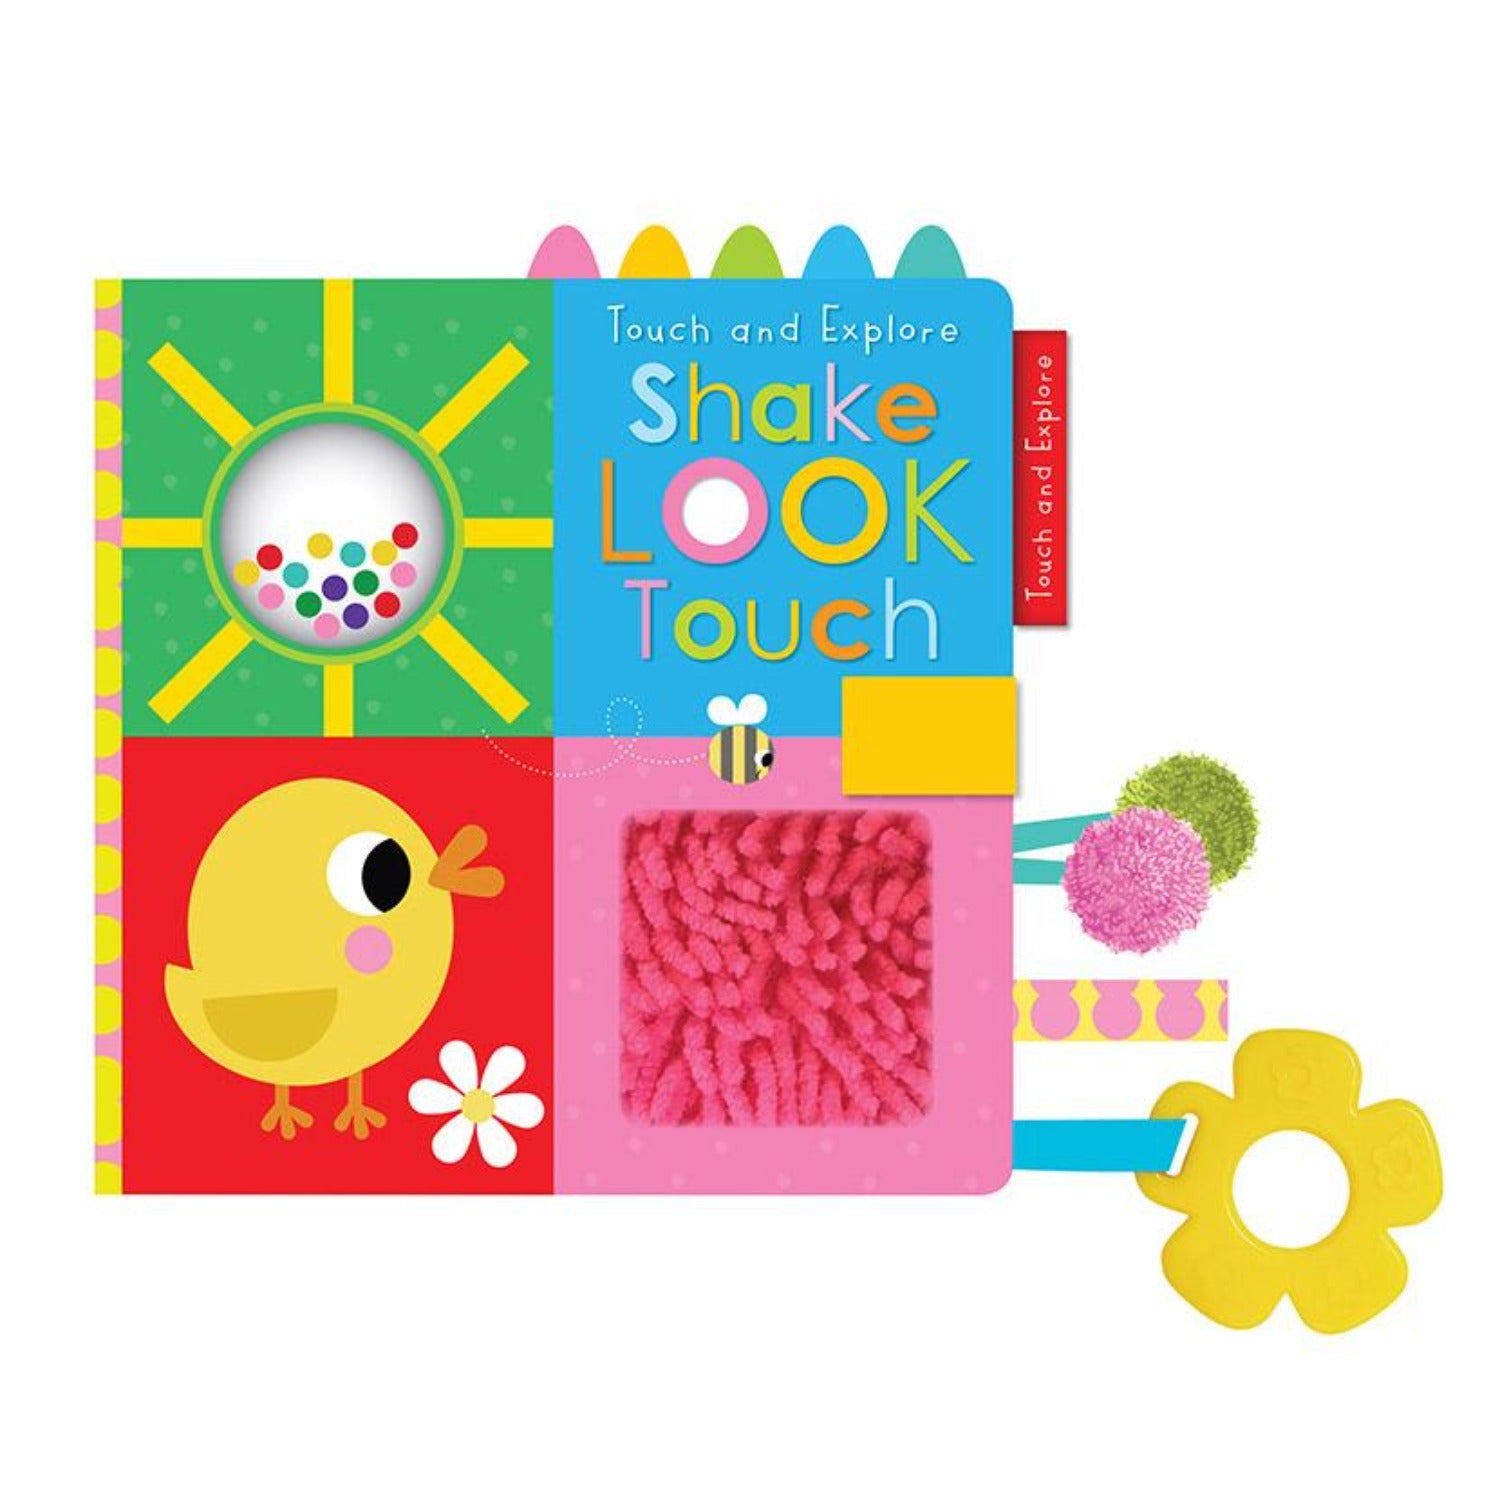 sensory cloth book, aimed at newborns and babies from birth to 12 months.